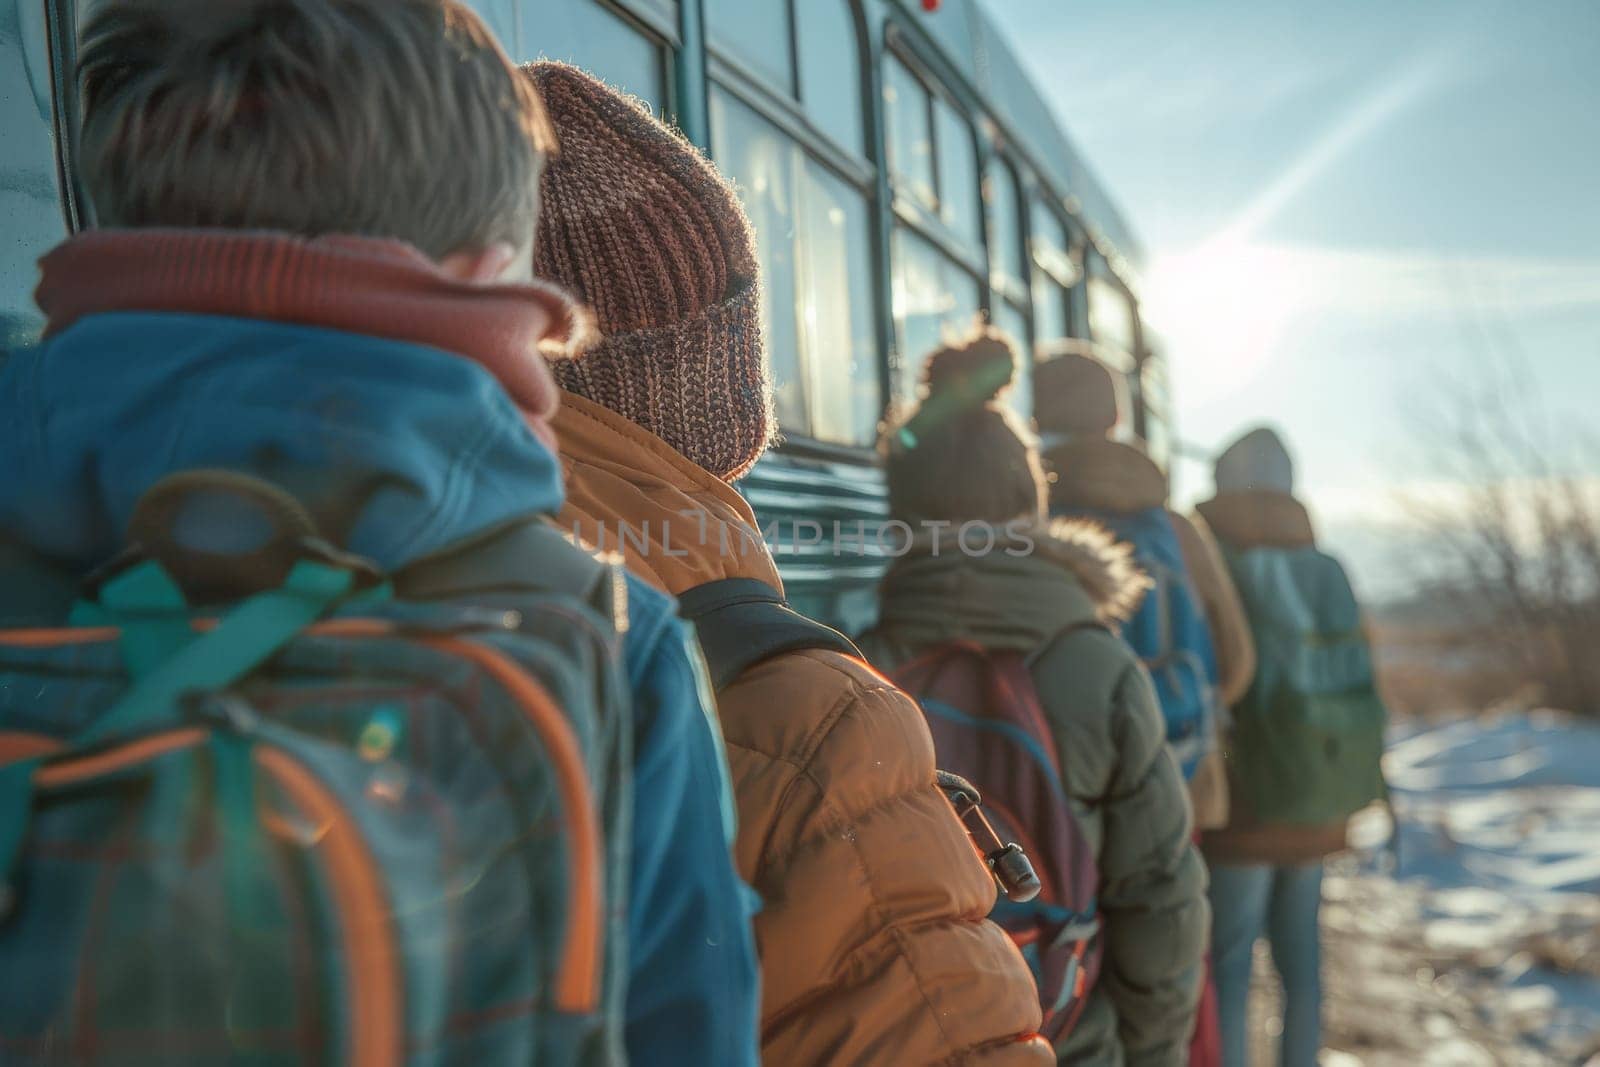 A group of children are standing in line to board a bus. They are all wearing backpacks and hats, and the sun is shining brightly. Scene is cheerful and energetic